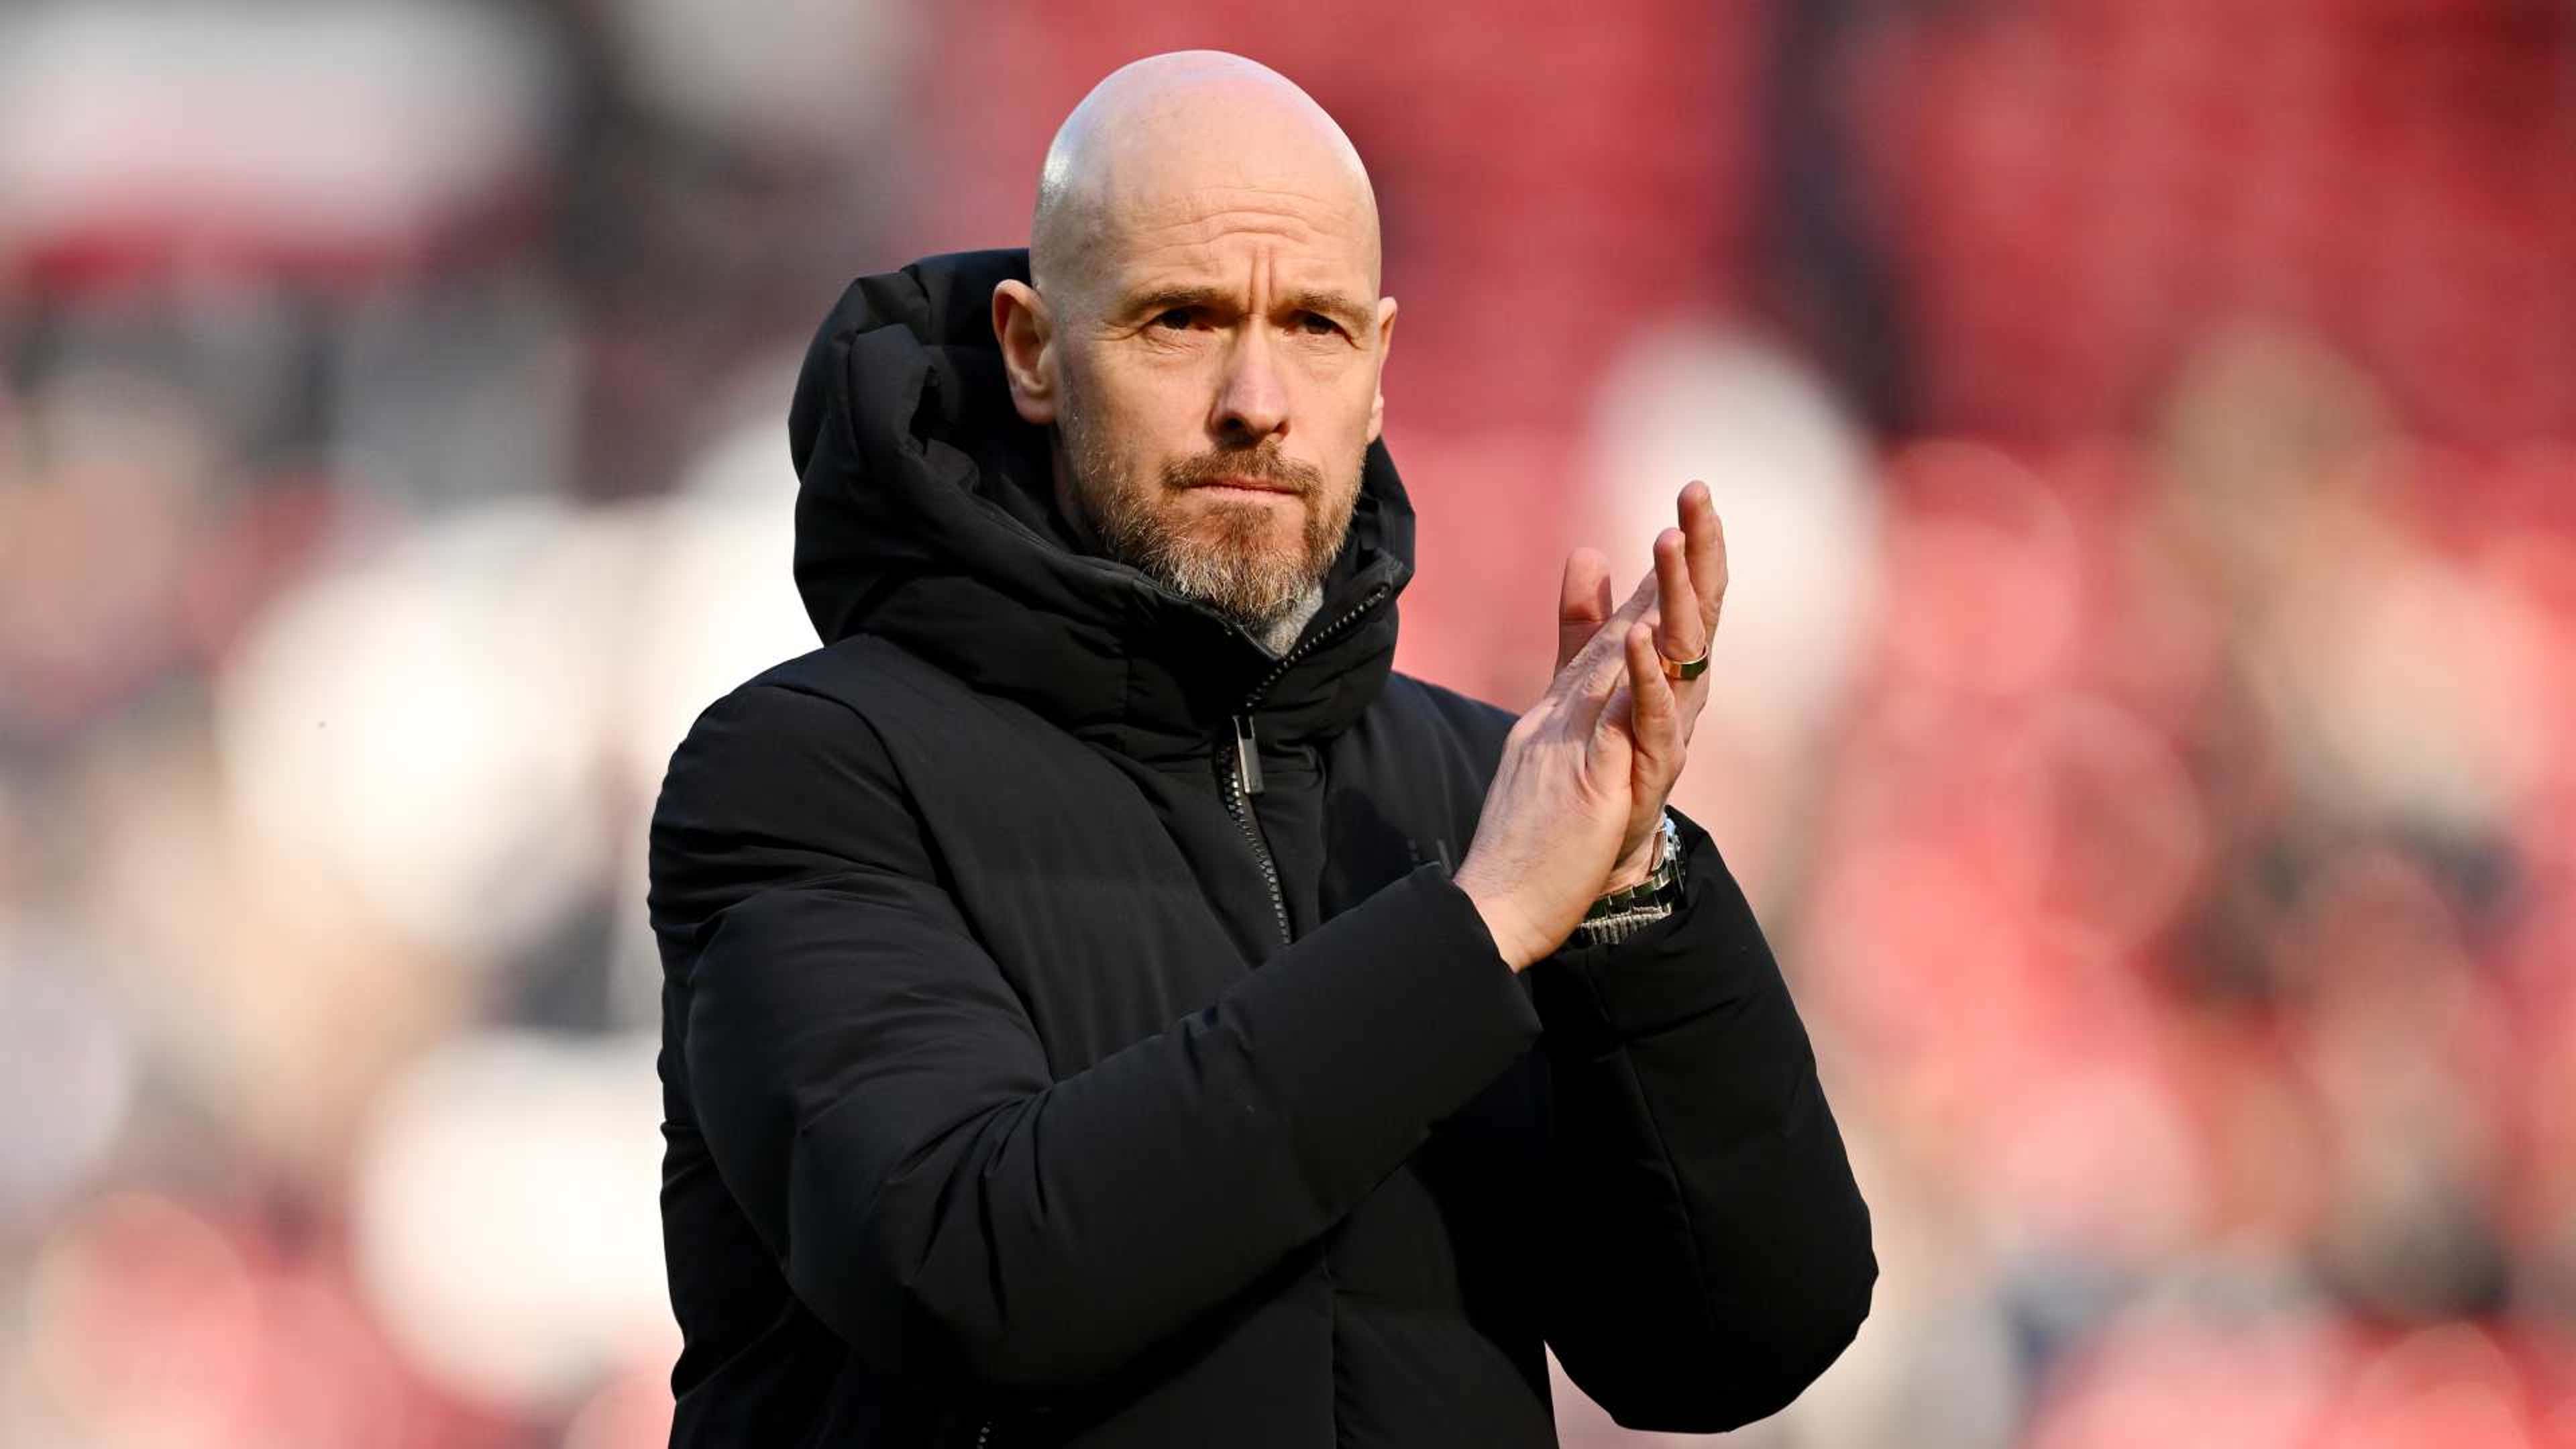 Together, we are a formidable force' - Erik ten Hag lays down